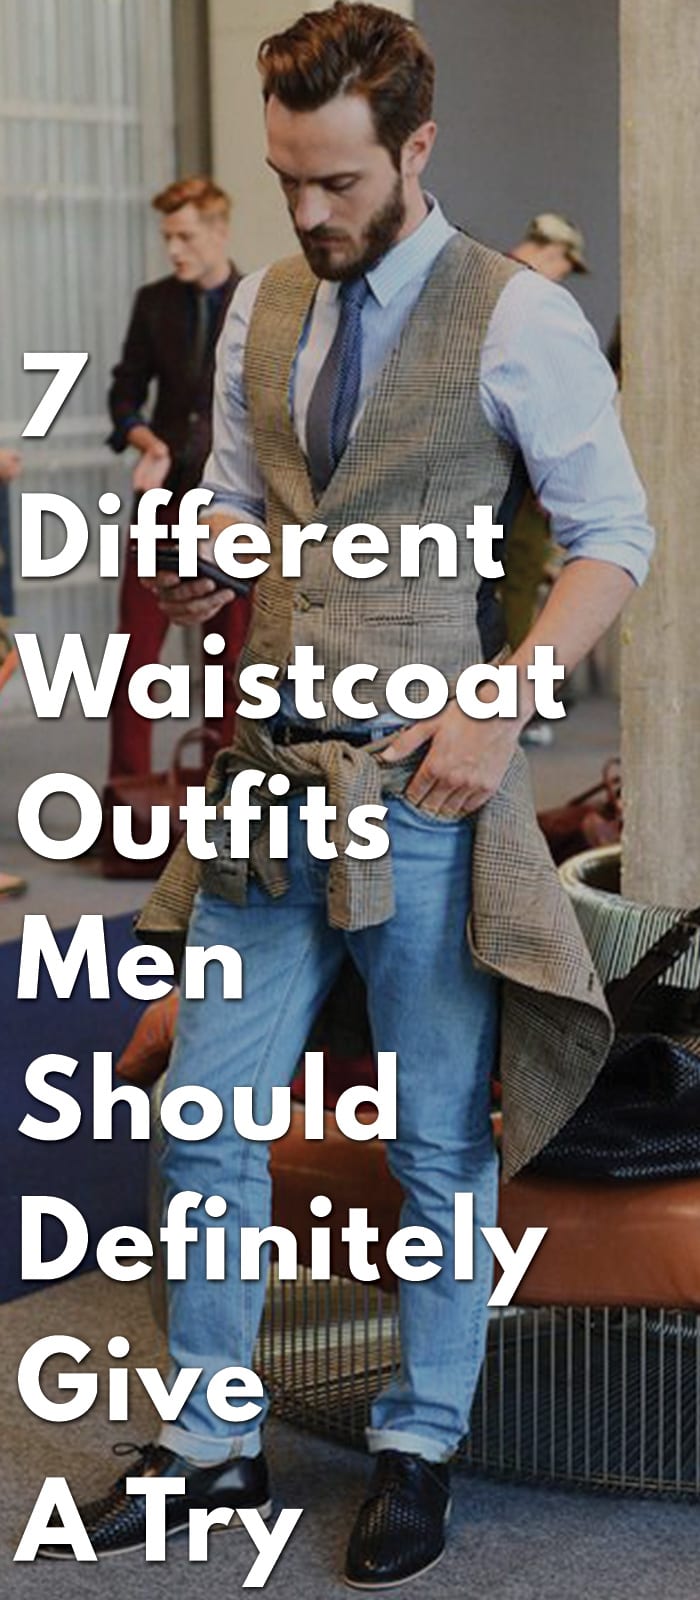 7-Different-Waistcoat-Outfits-Men-Should-Definitely-Give-A-Try